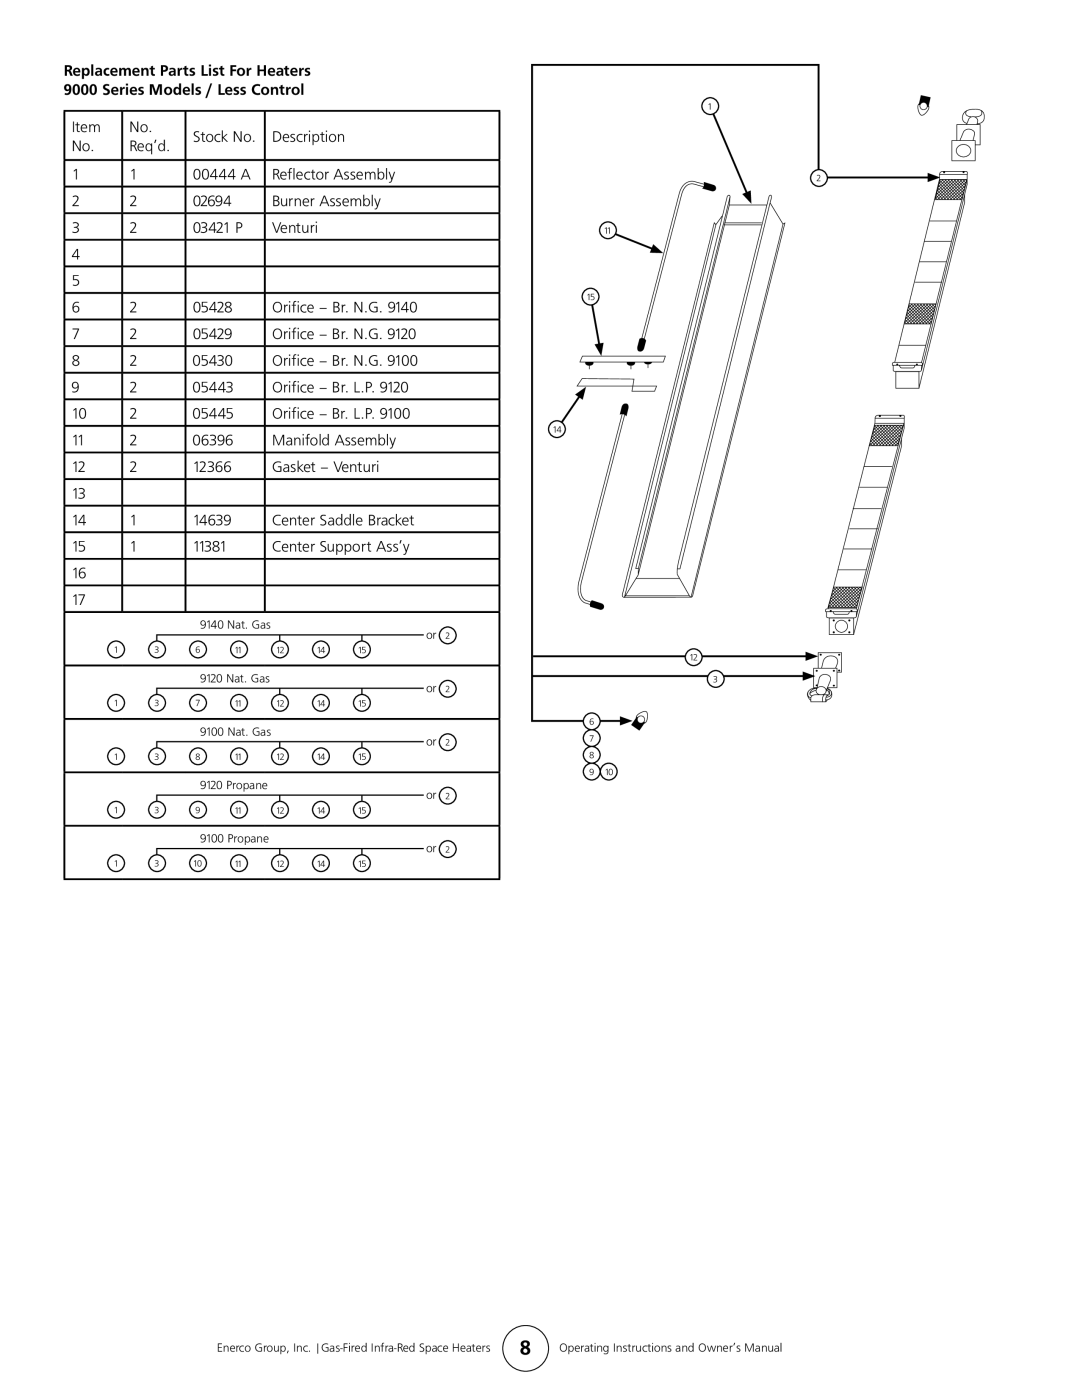 Enerco HS4040, HS8060, HS9100S, HS9120 owner manual Replacement Parts List For Heaters, Series Models / Less Control 